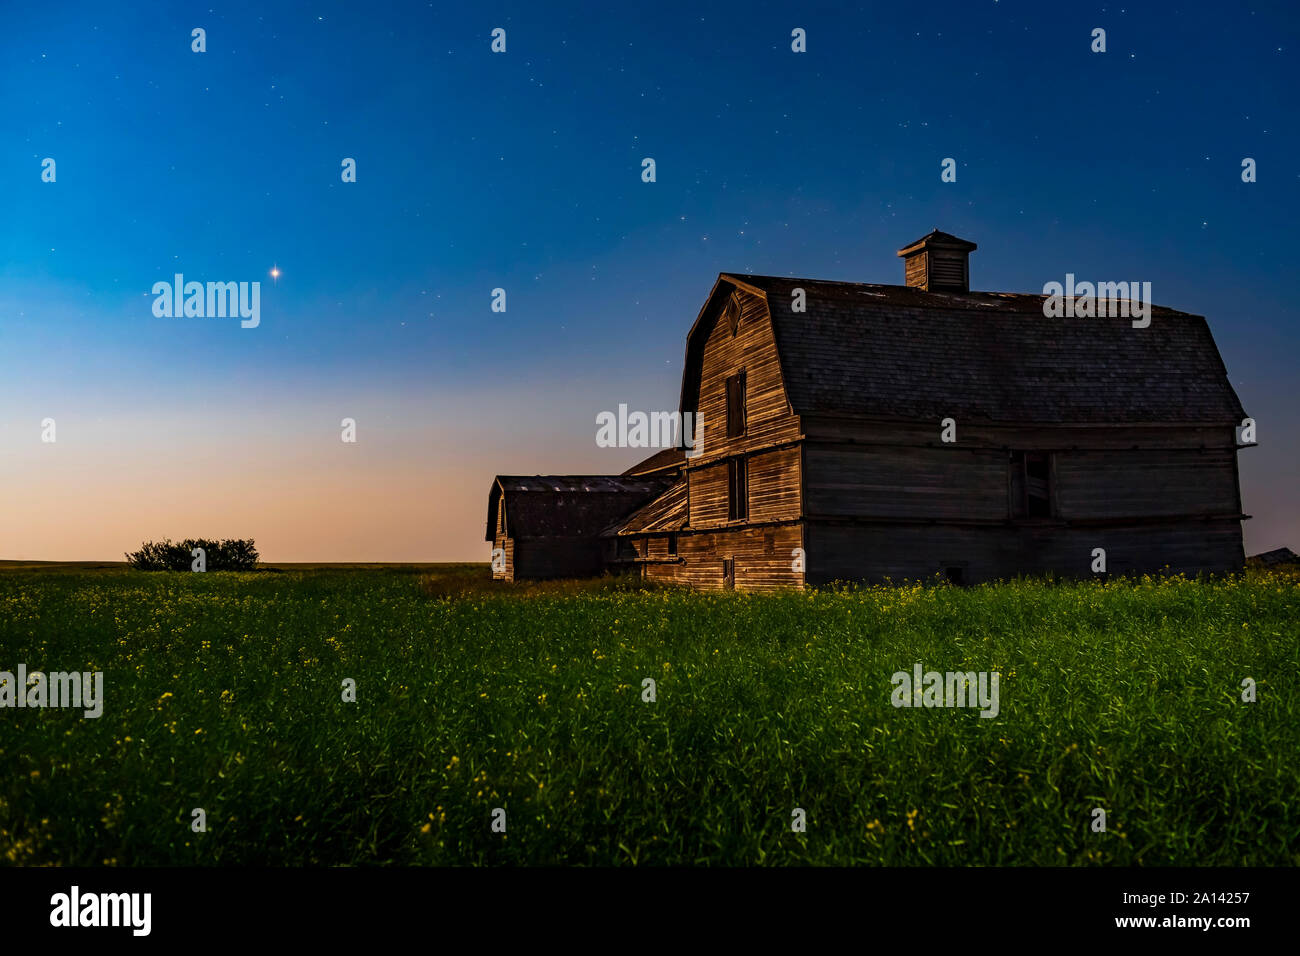 Planet Mars shining over an old barn amid a field of canola. Stock Photo